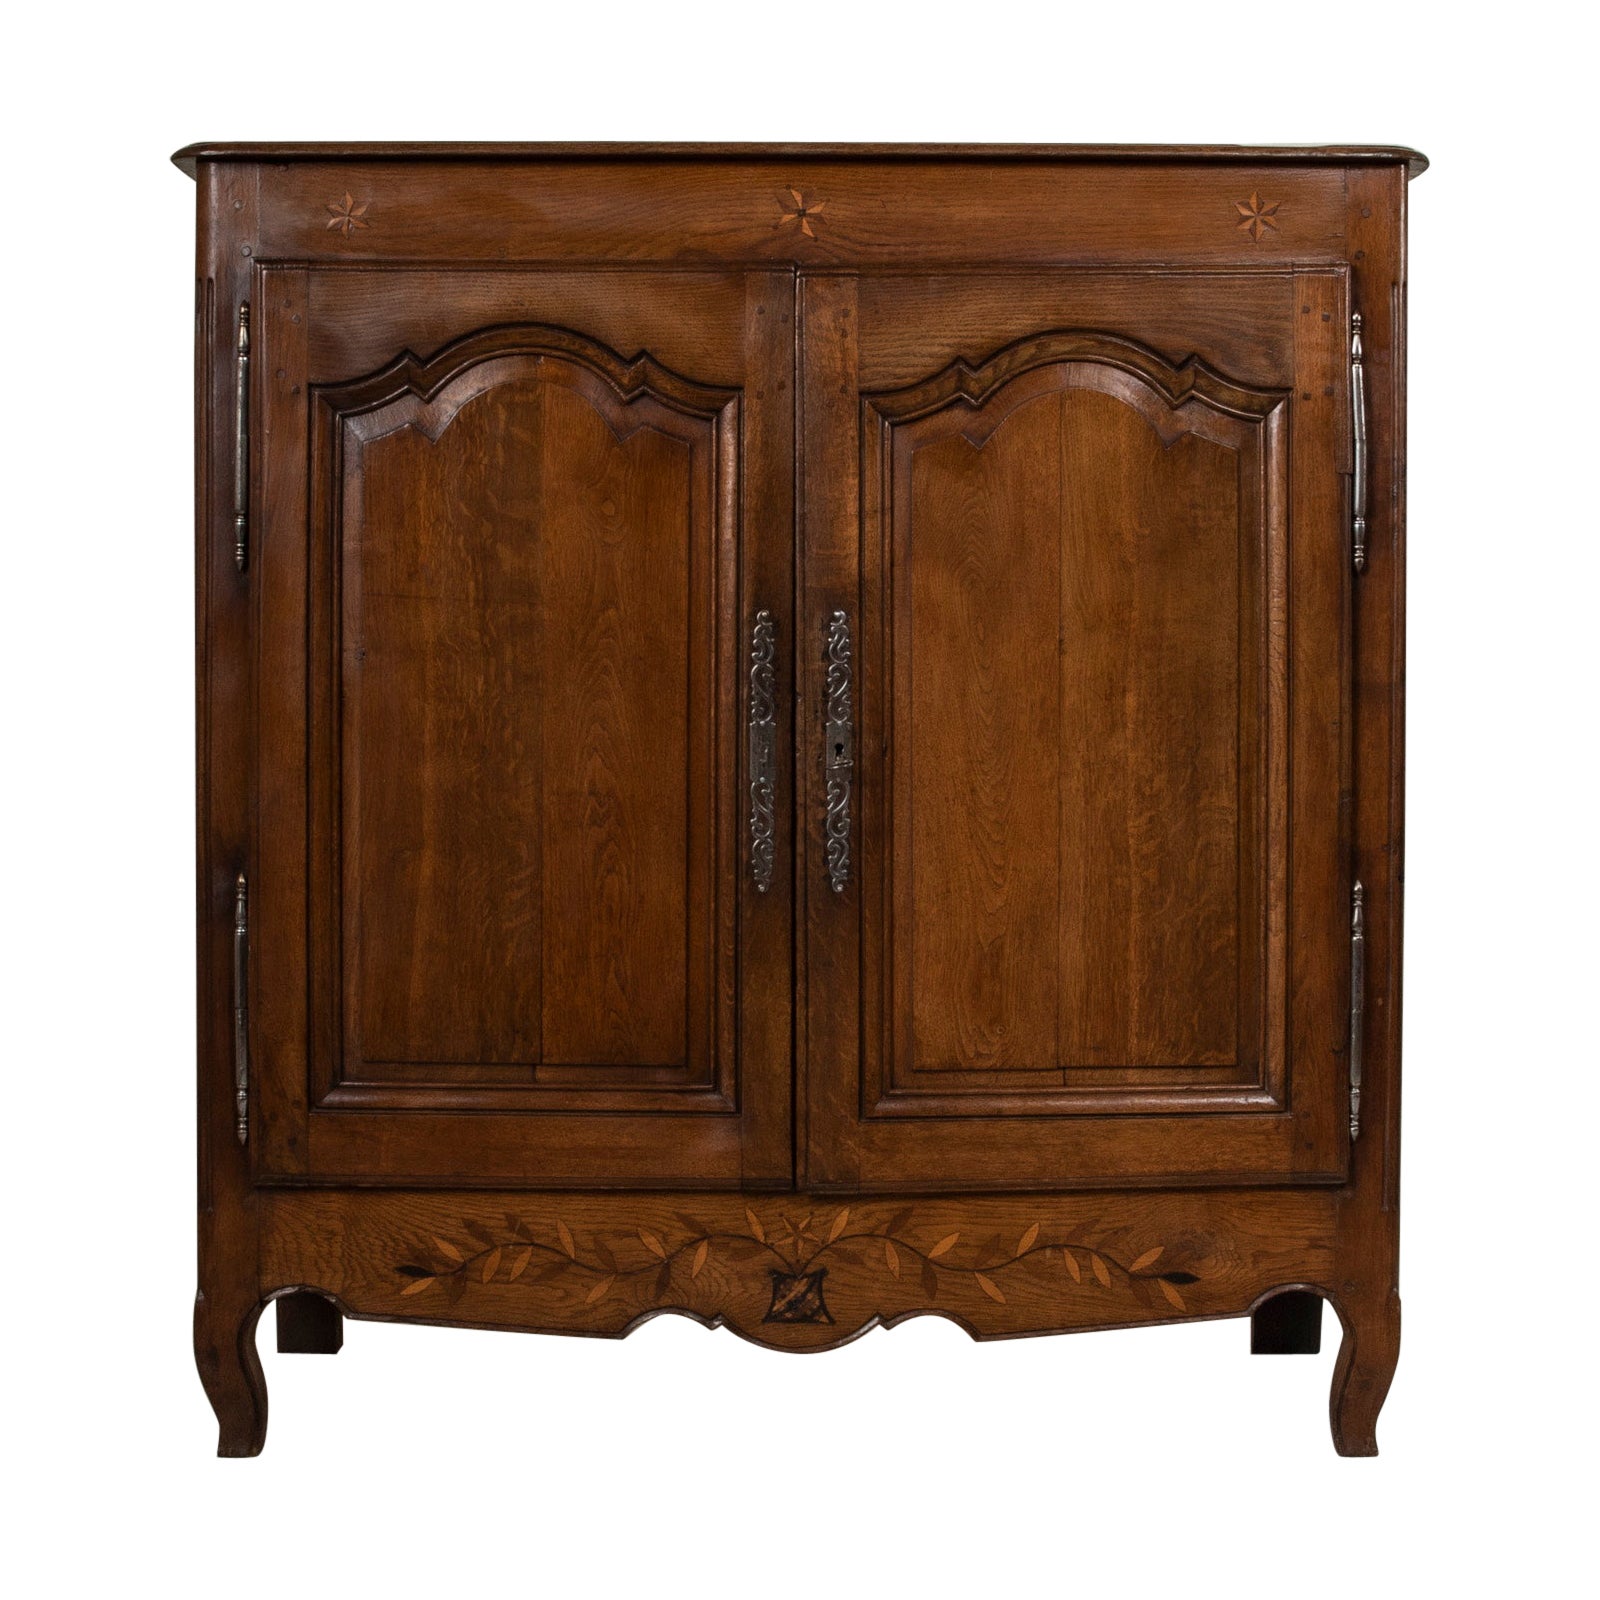 Early 19th Century French Oak Bassette, Small Armoire, Buffet D'appui For Sale